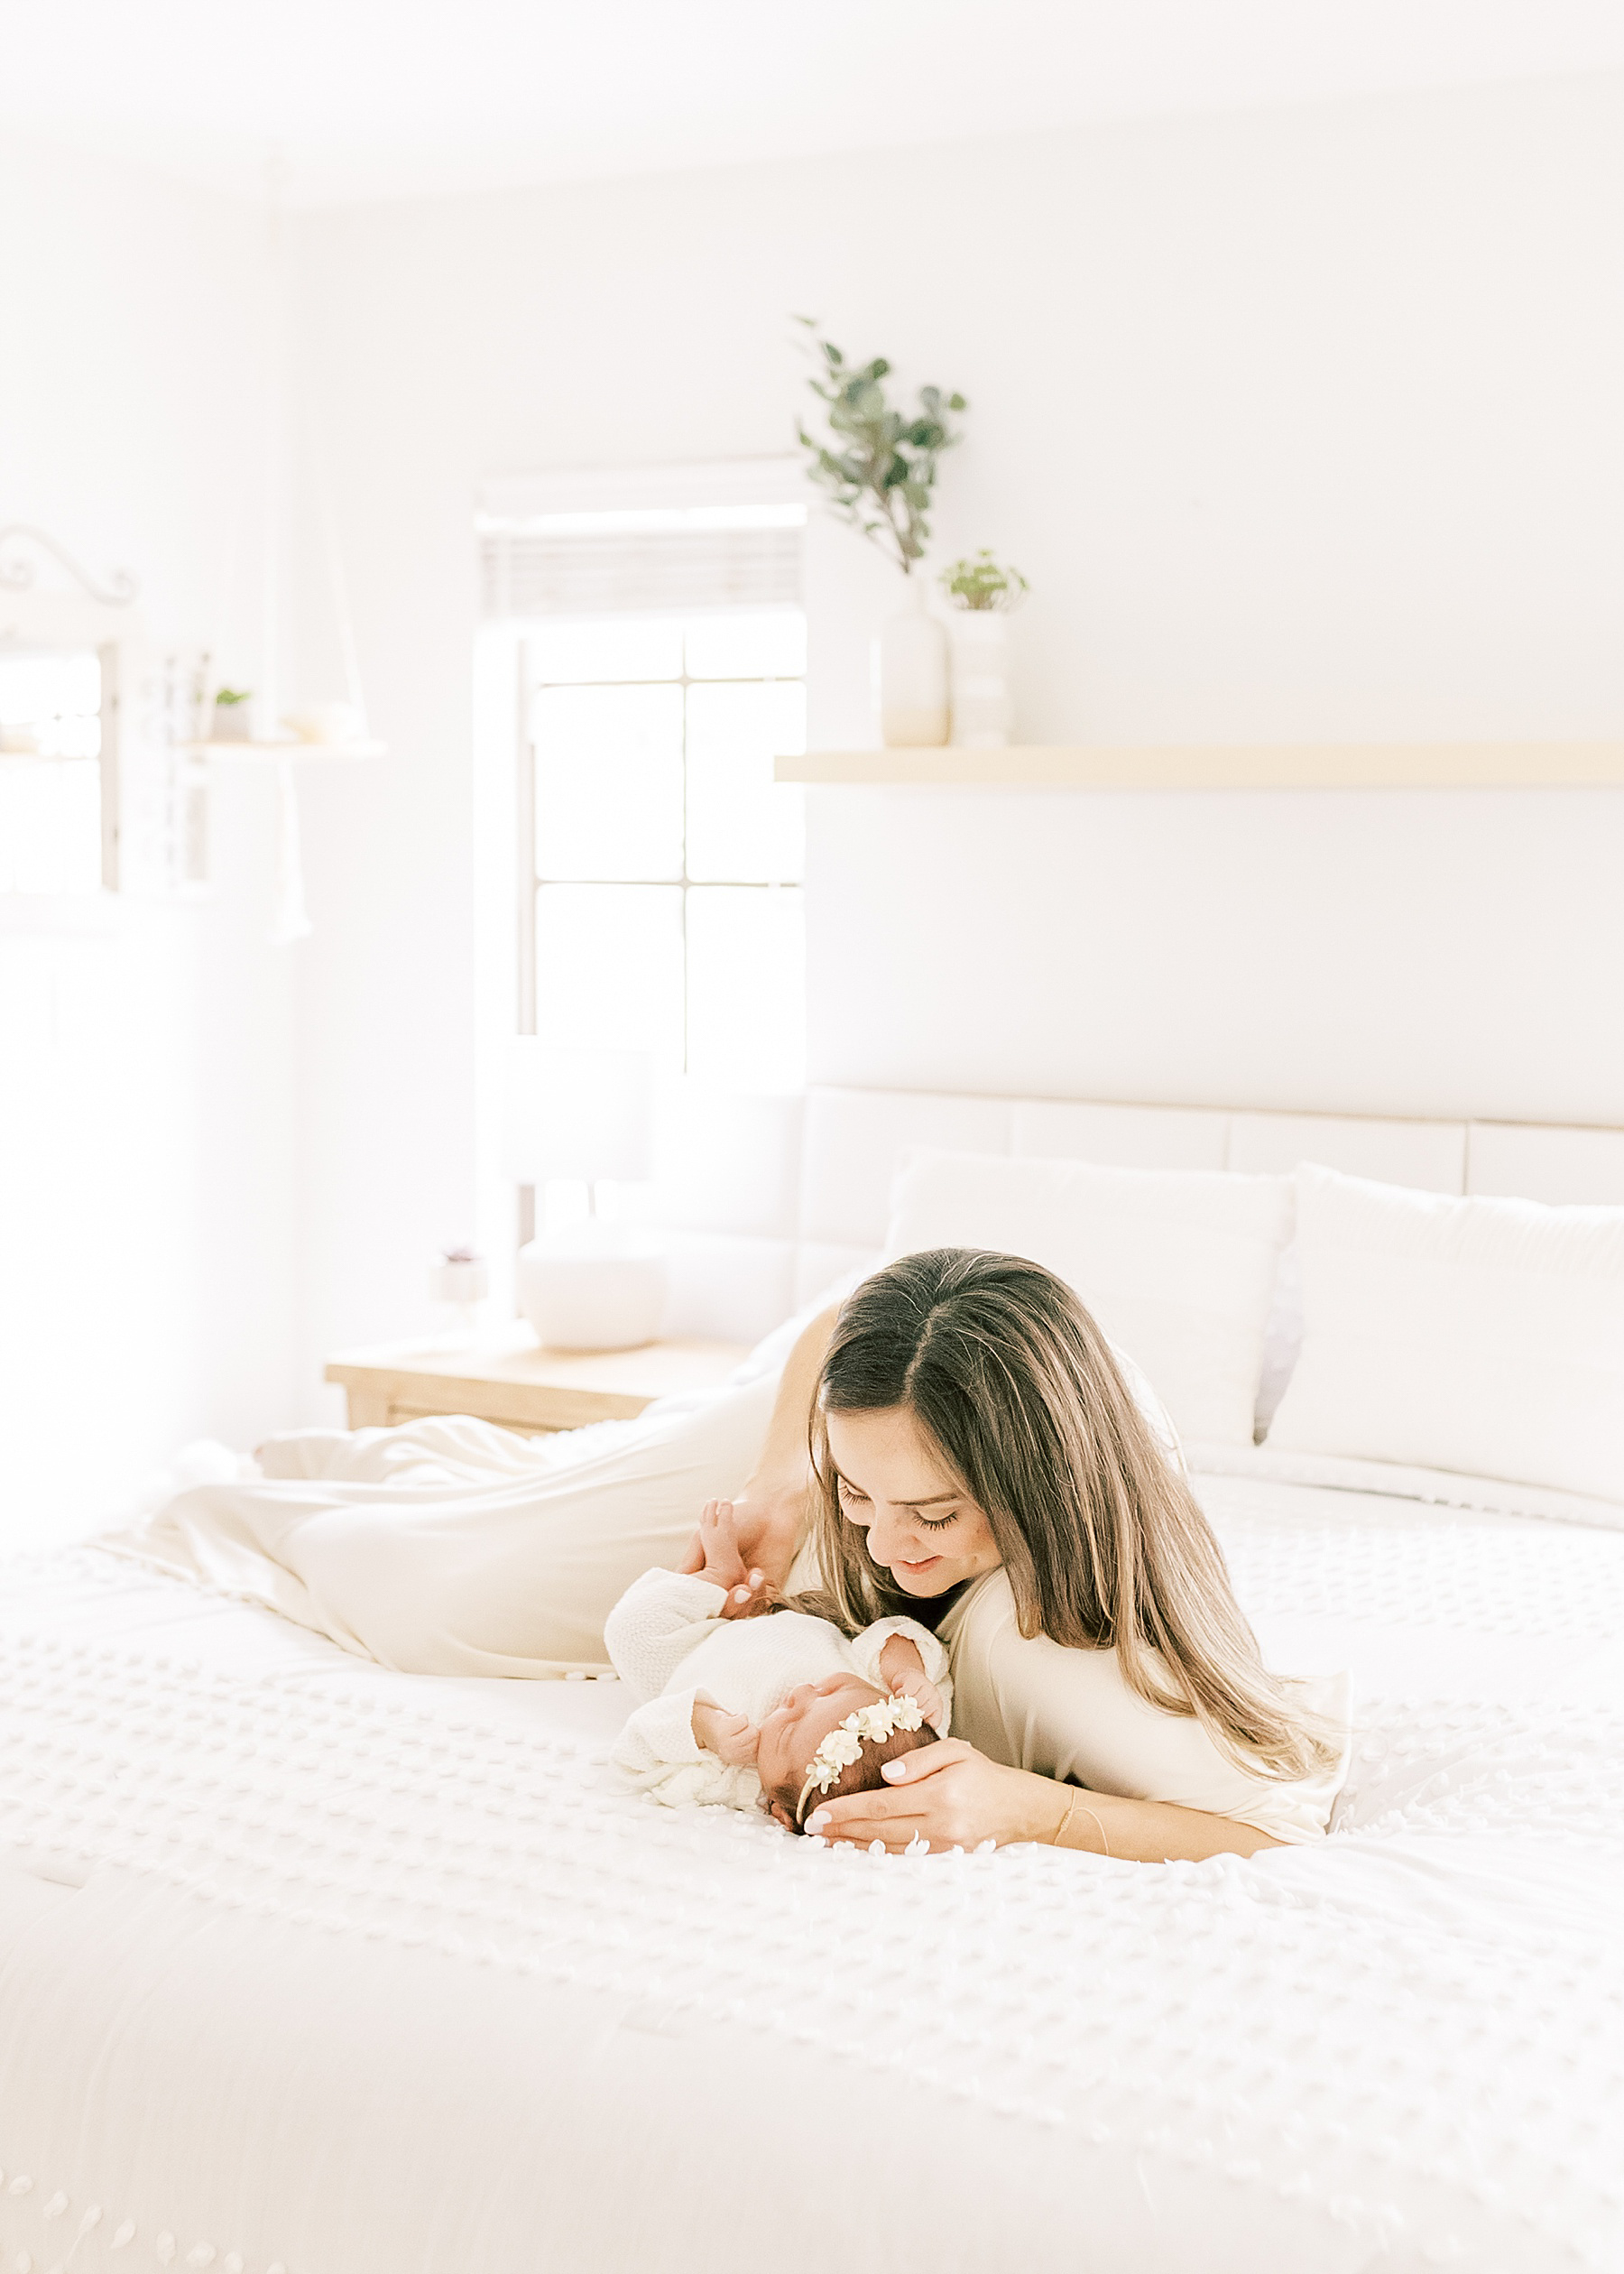 woman wearing cream dress sitting on bed with white bedding holding newborn baby